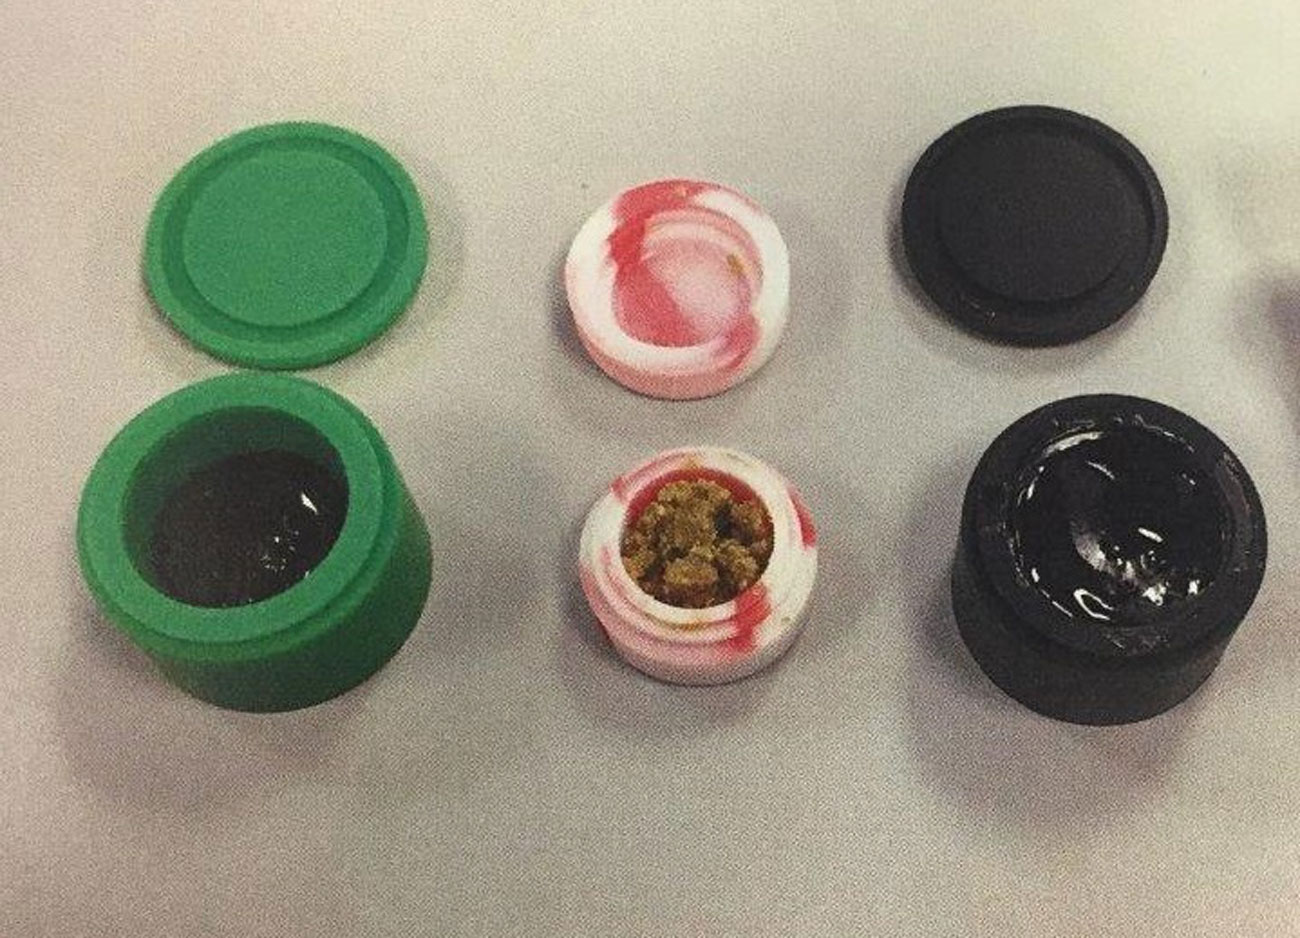 Two forms of marijuana derivatives in containers. (Courtesy Fairfax County Police Department)